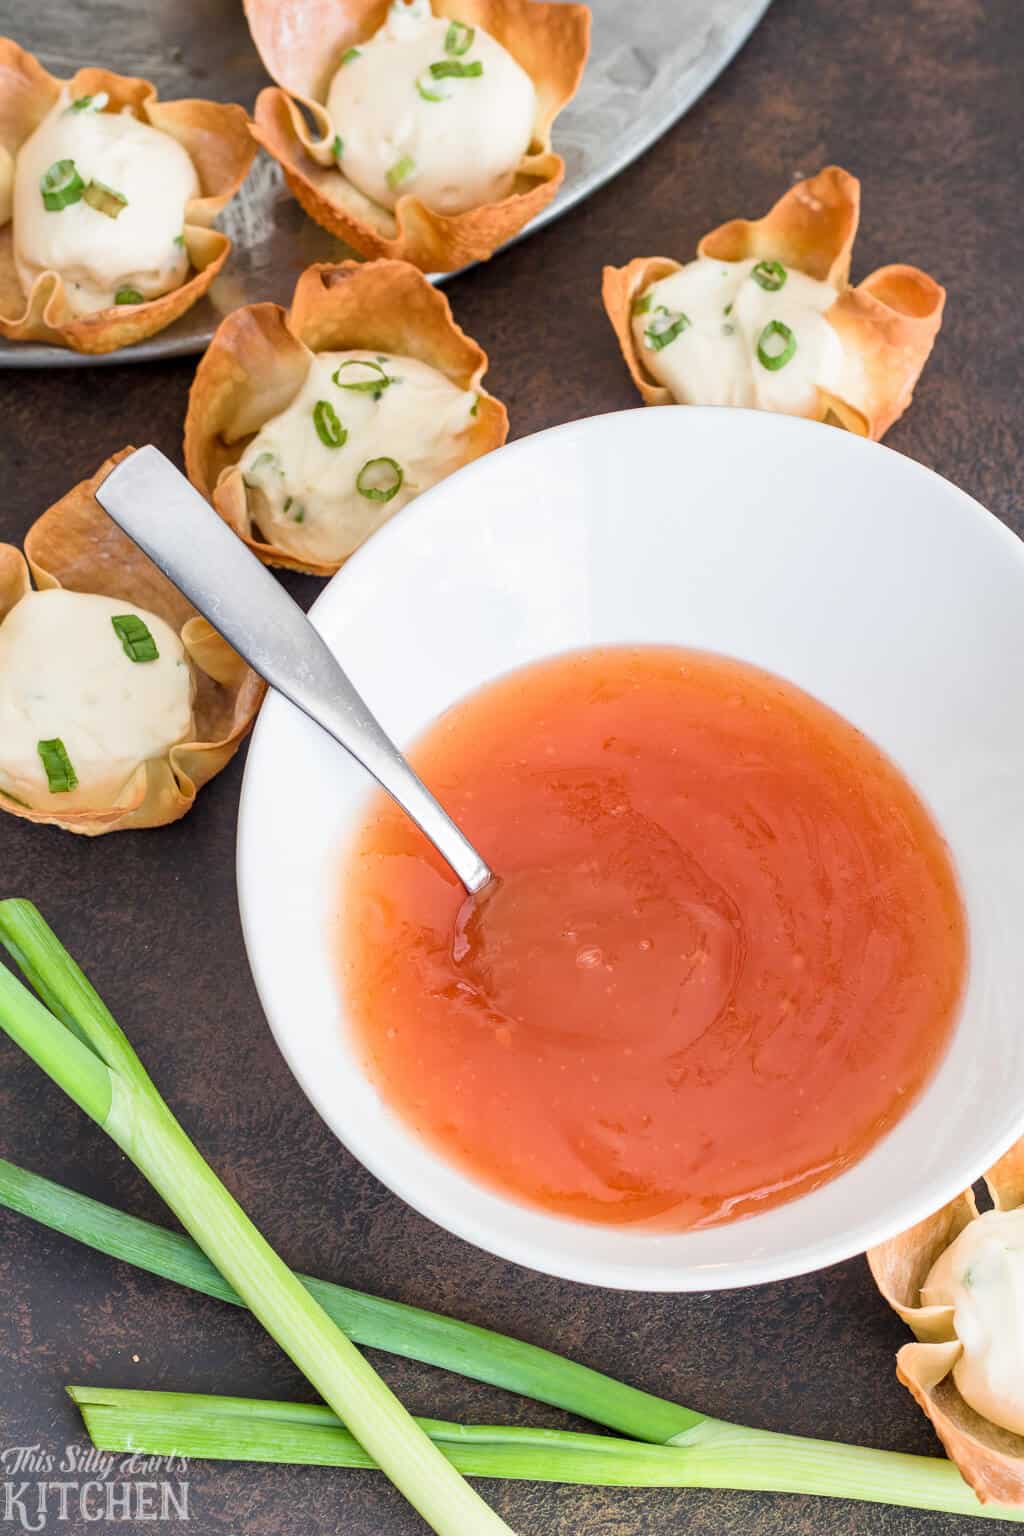 The Best Sweet and Sour Sauce, only 5 ingredients and ready in minutes! #Recipe from ThisSillyGirlsKitchen.com #ChineseTakeout #sweetandsoursauce #BetterThanTakeout